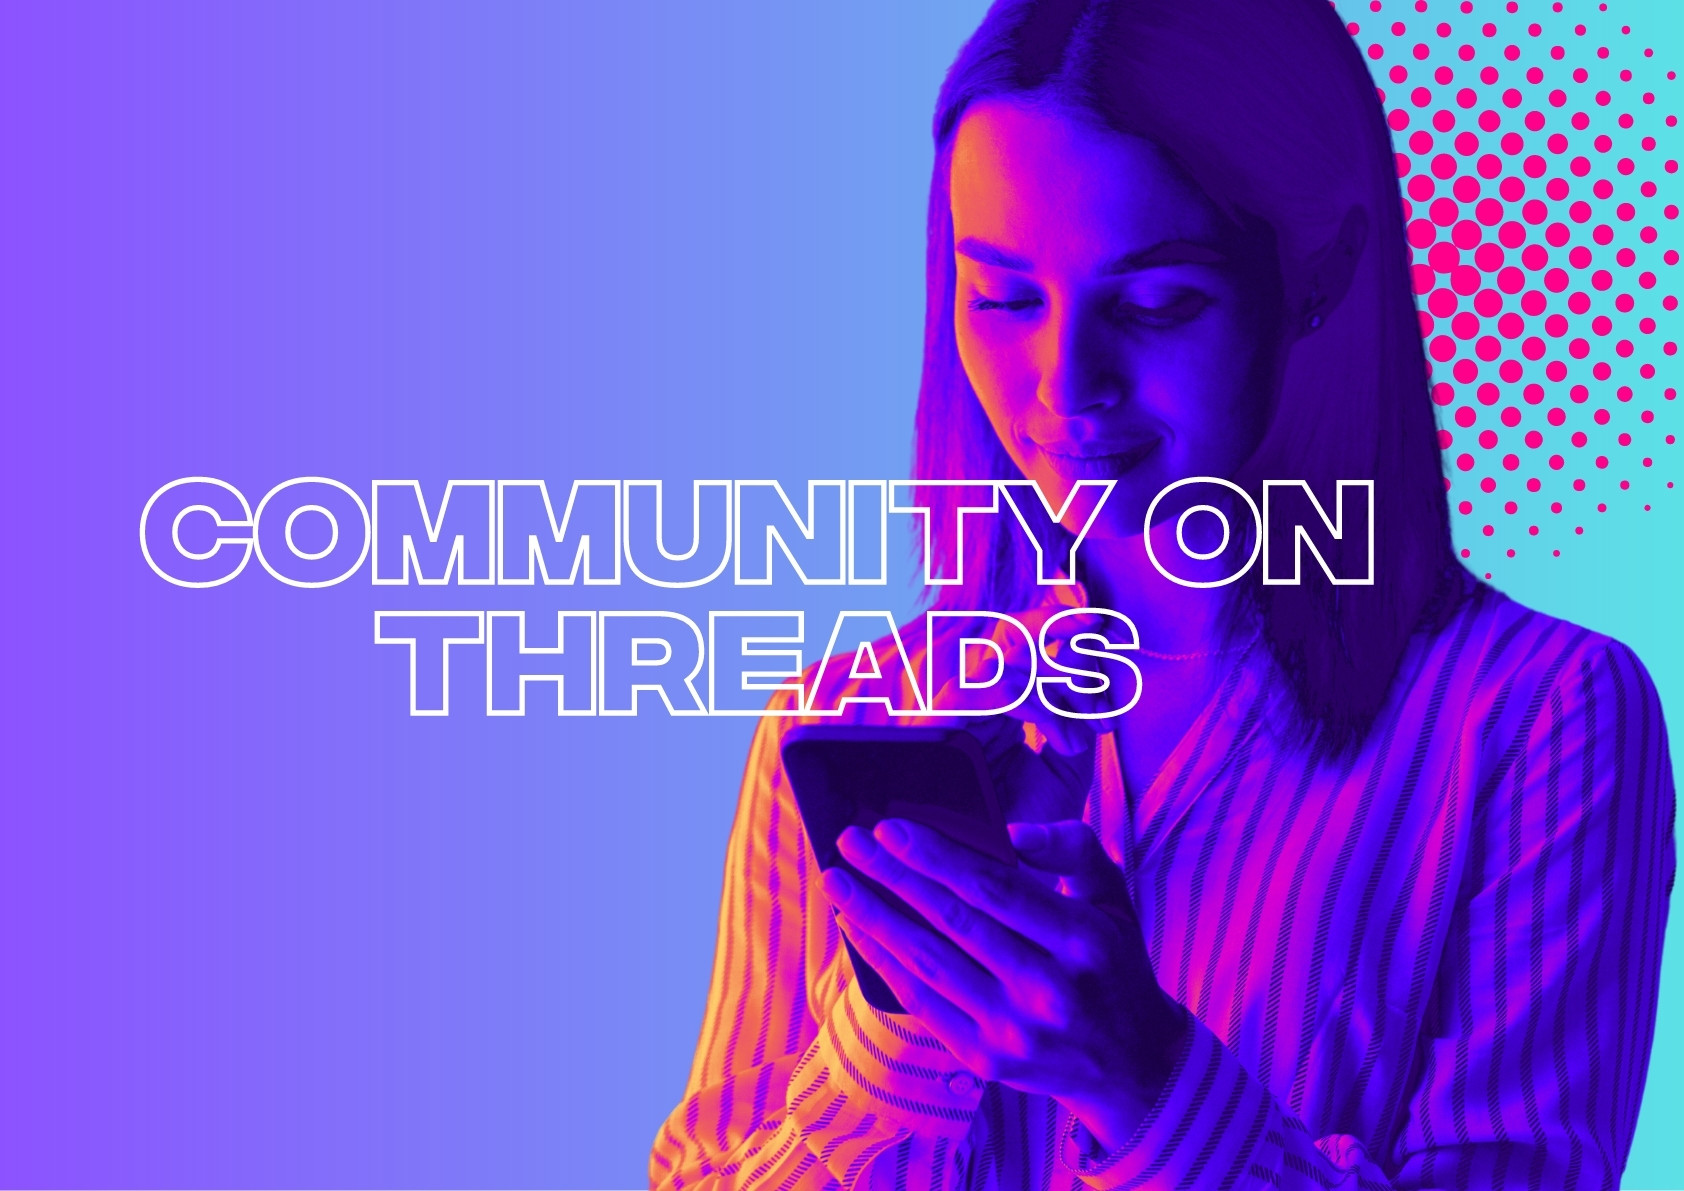 The Power of Community on Threads